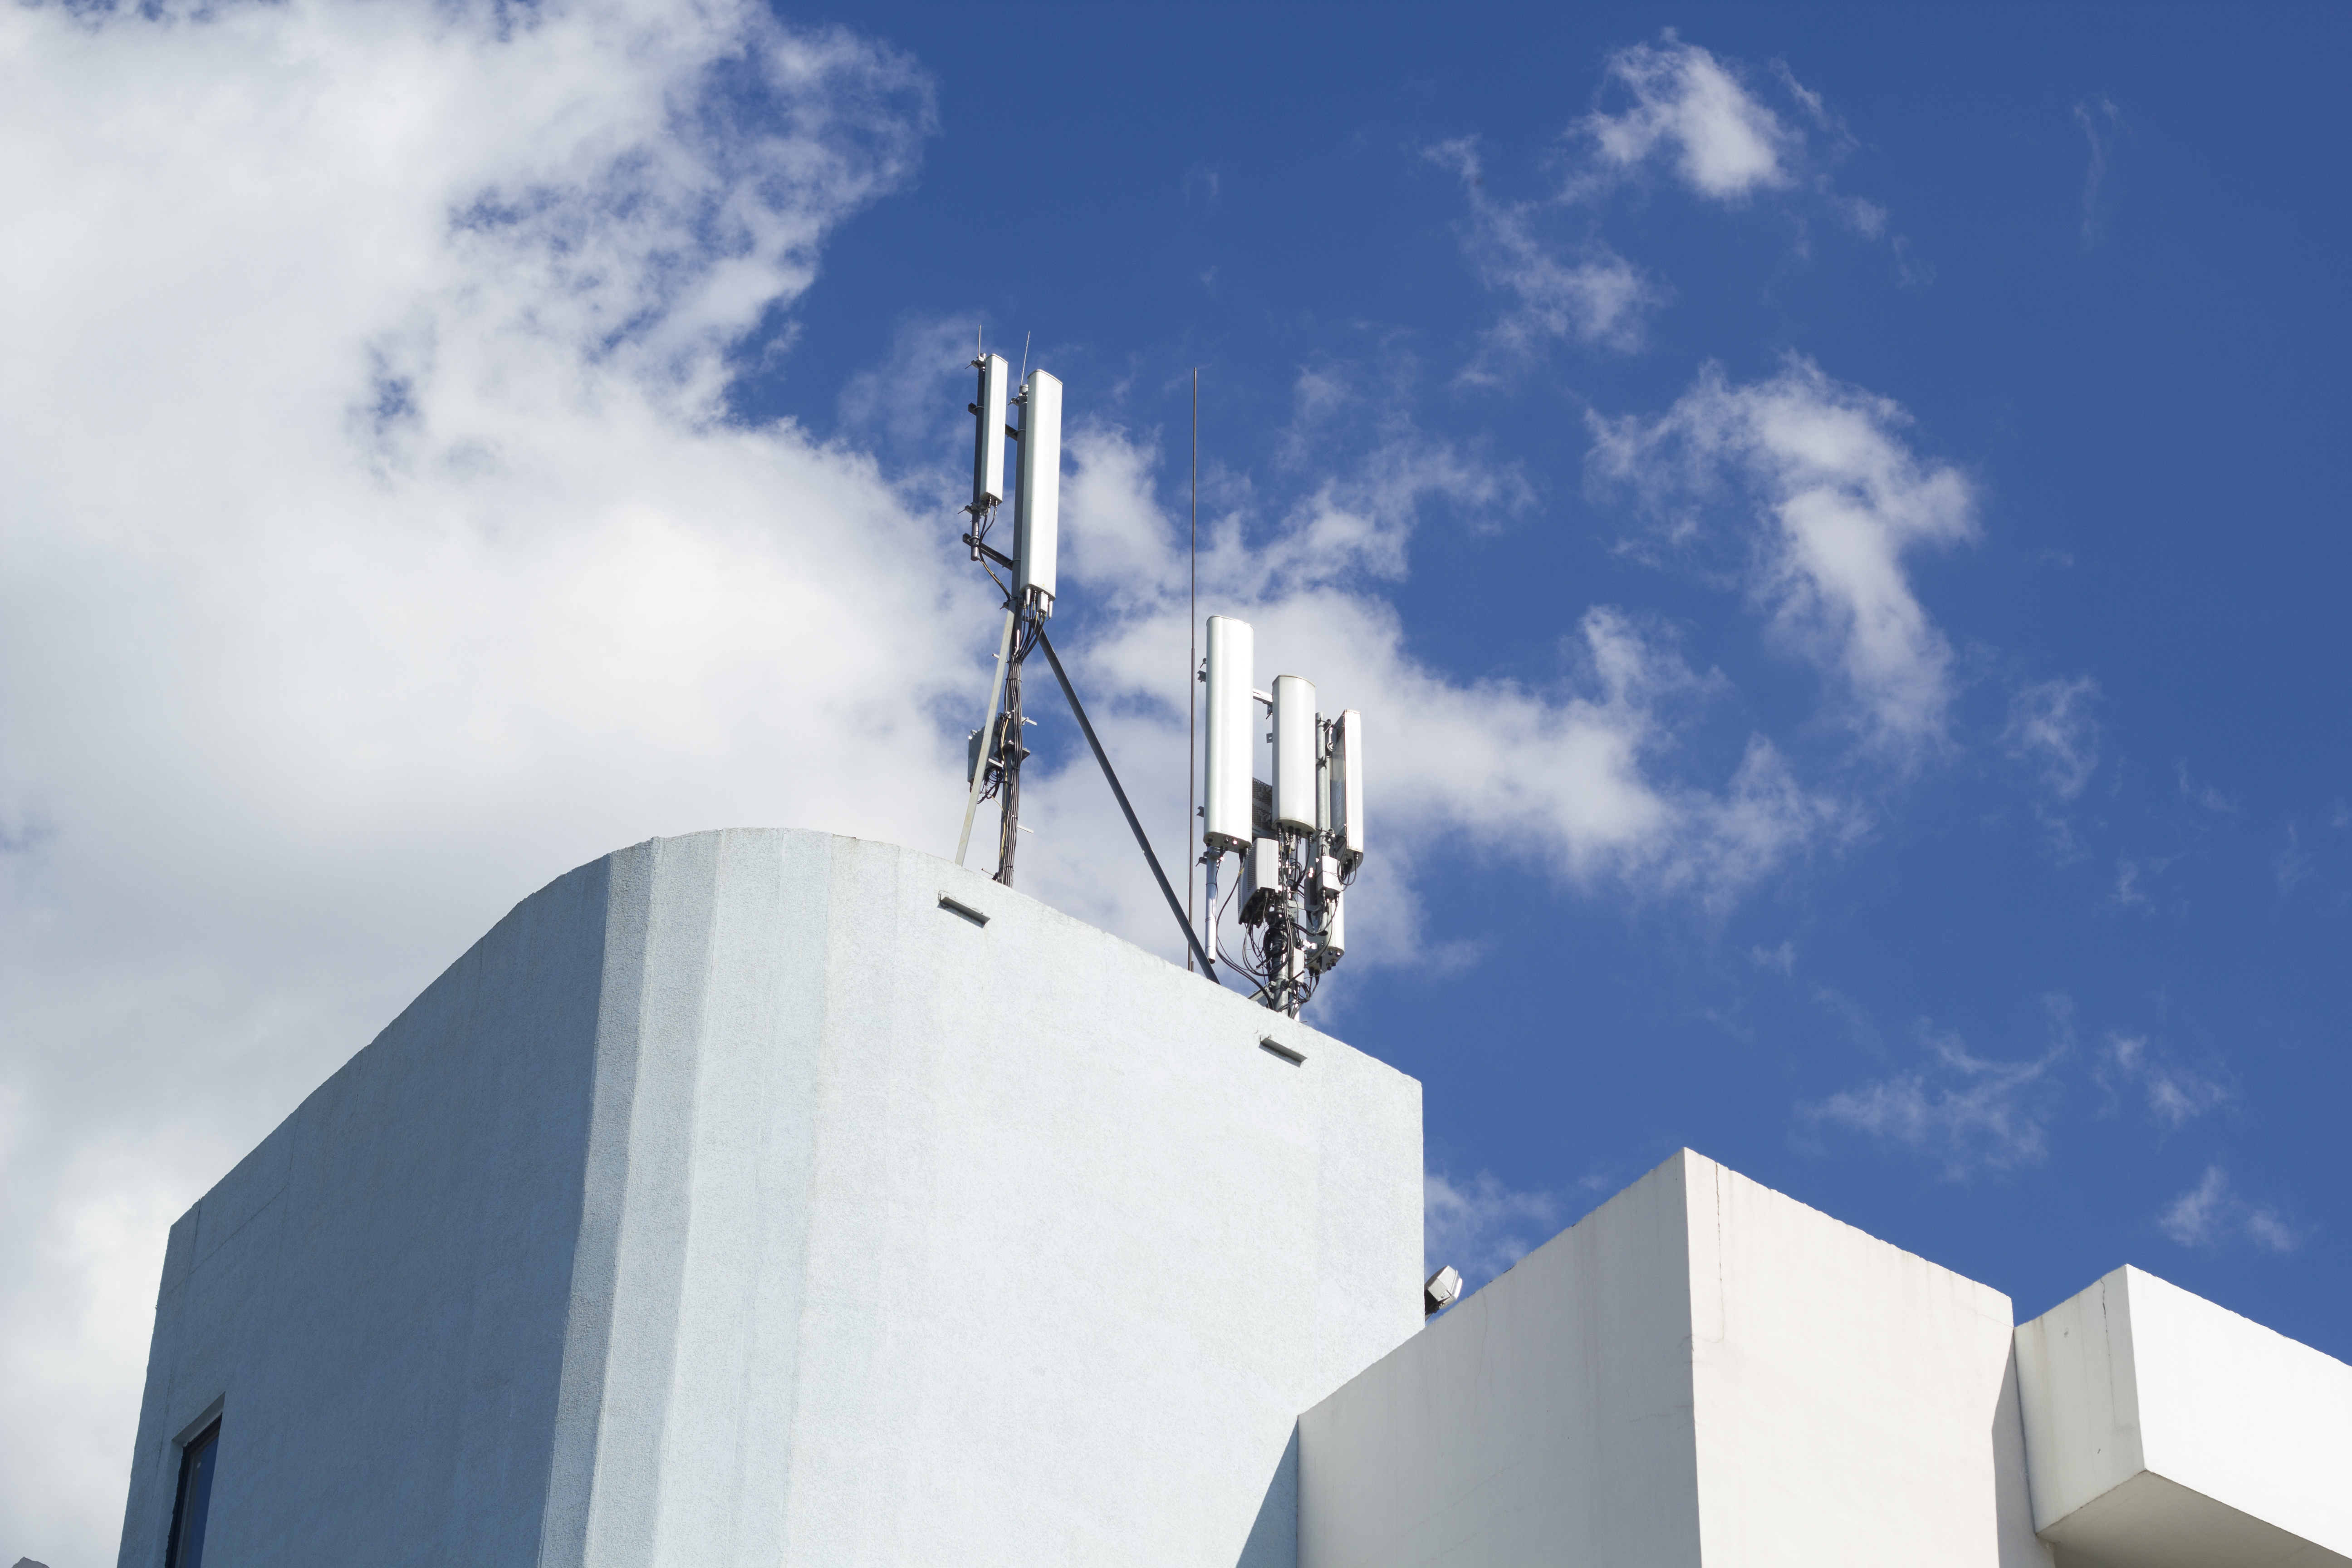 Smart cellular network antenna base station on the telecommunication mast on the roof of a building.